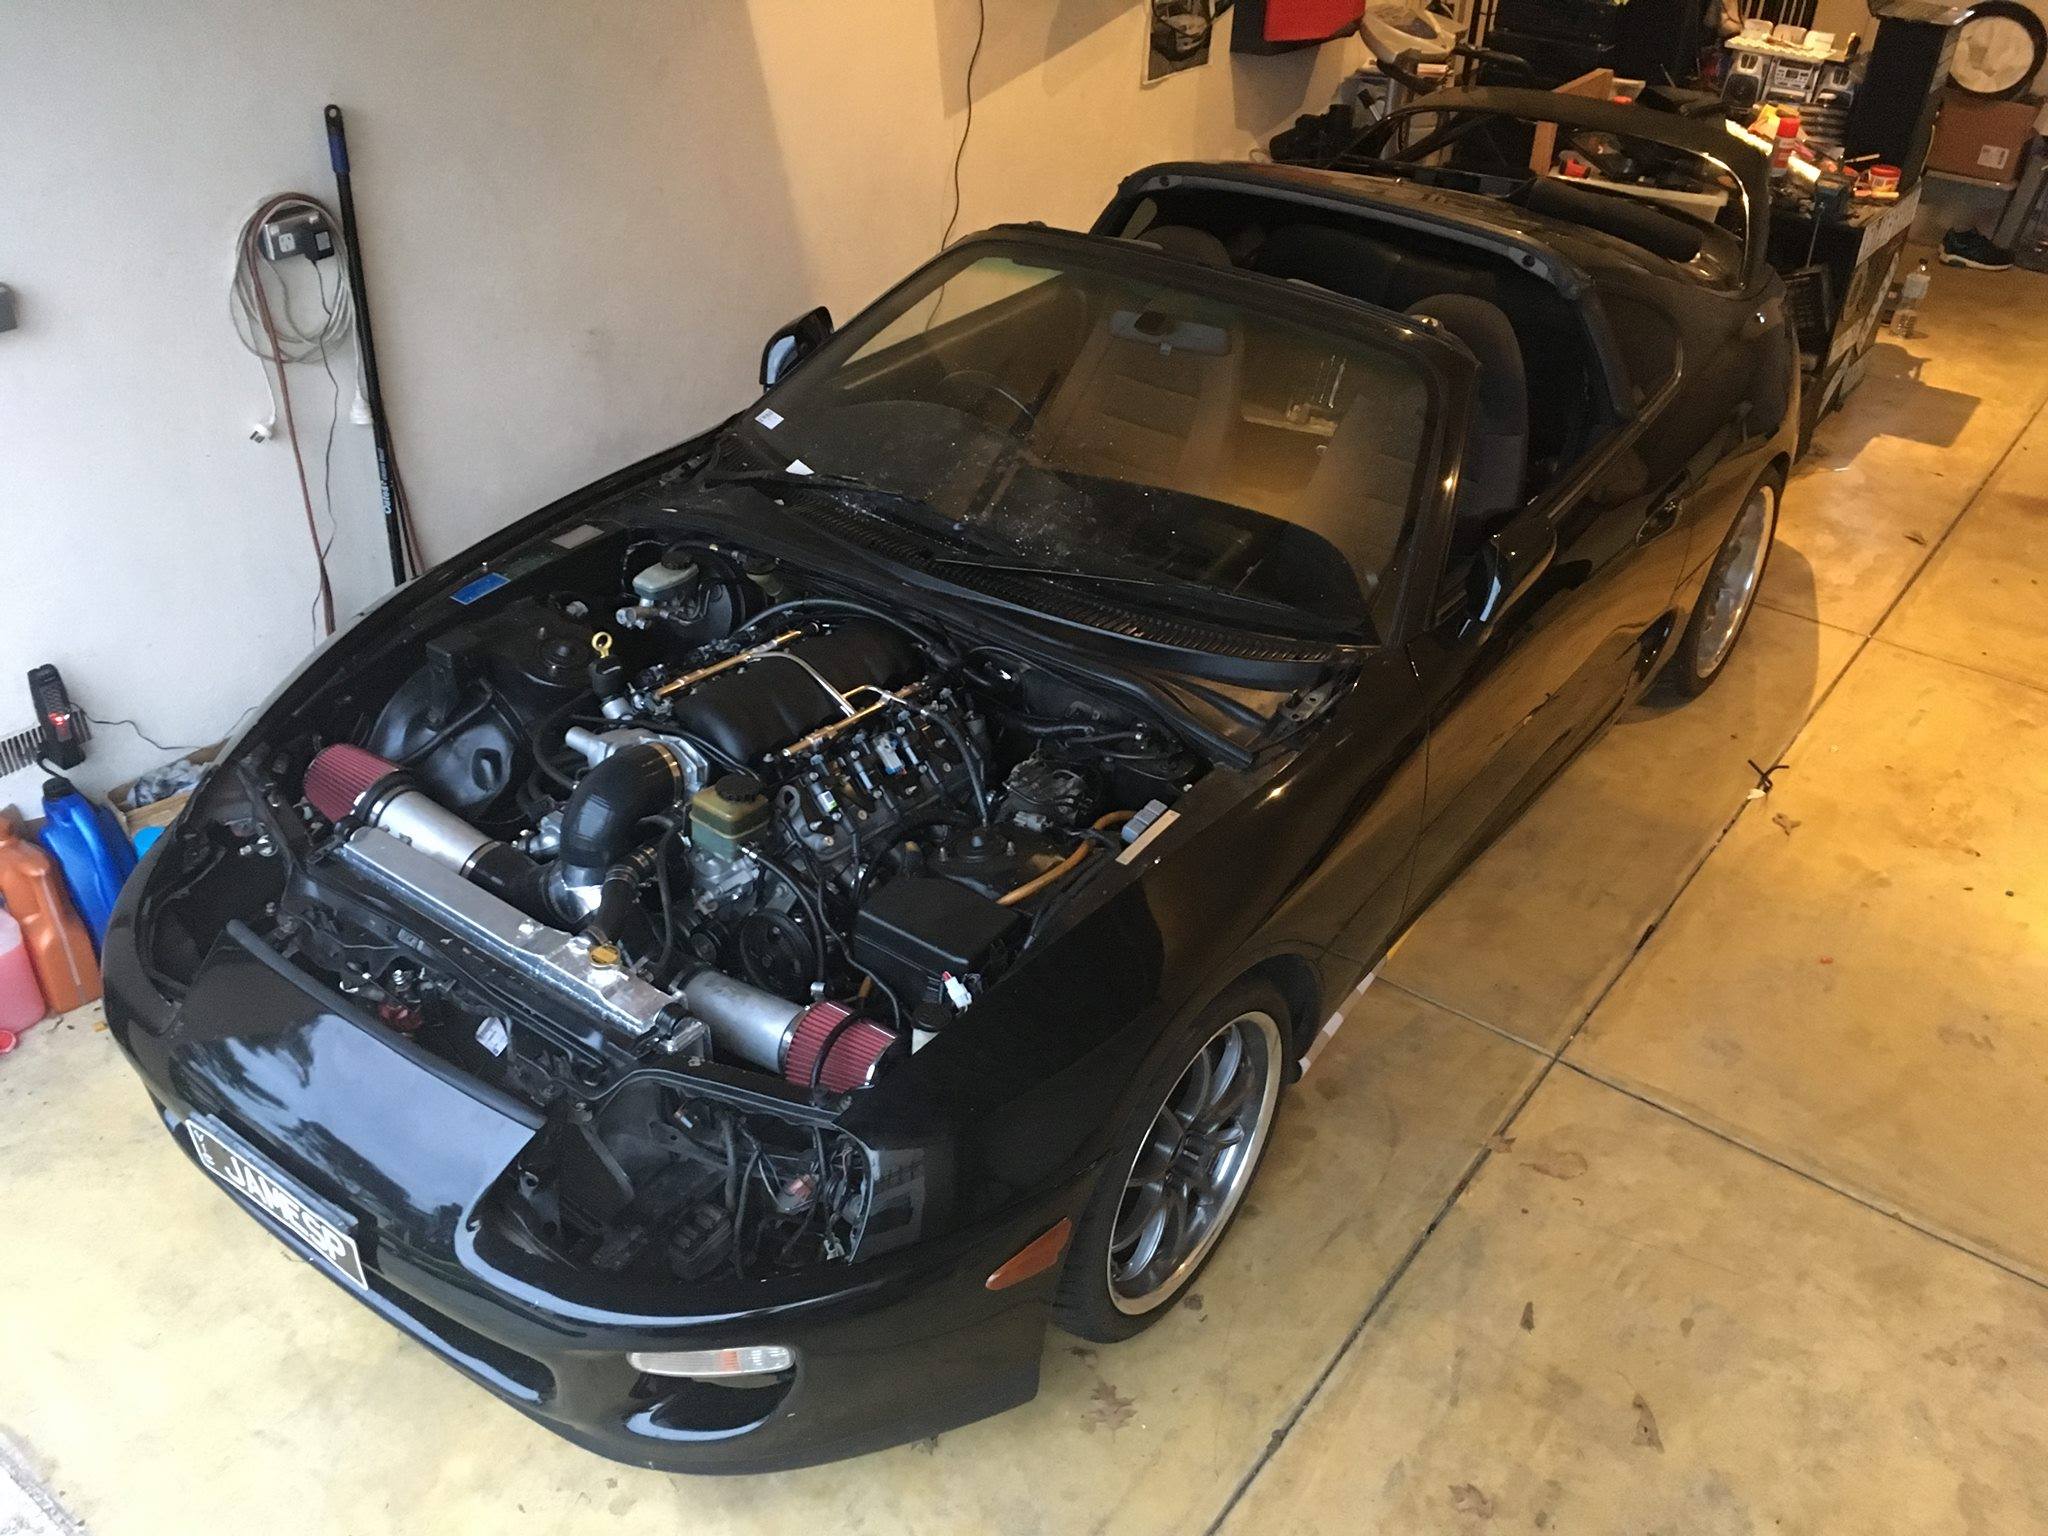 Mk4 Supra Trades In Its 2JZ for an LS3.